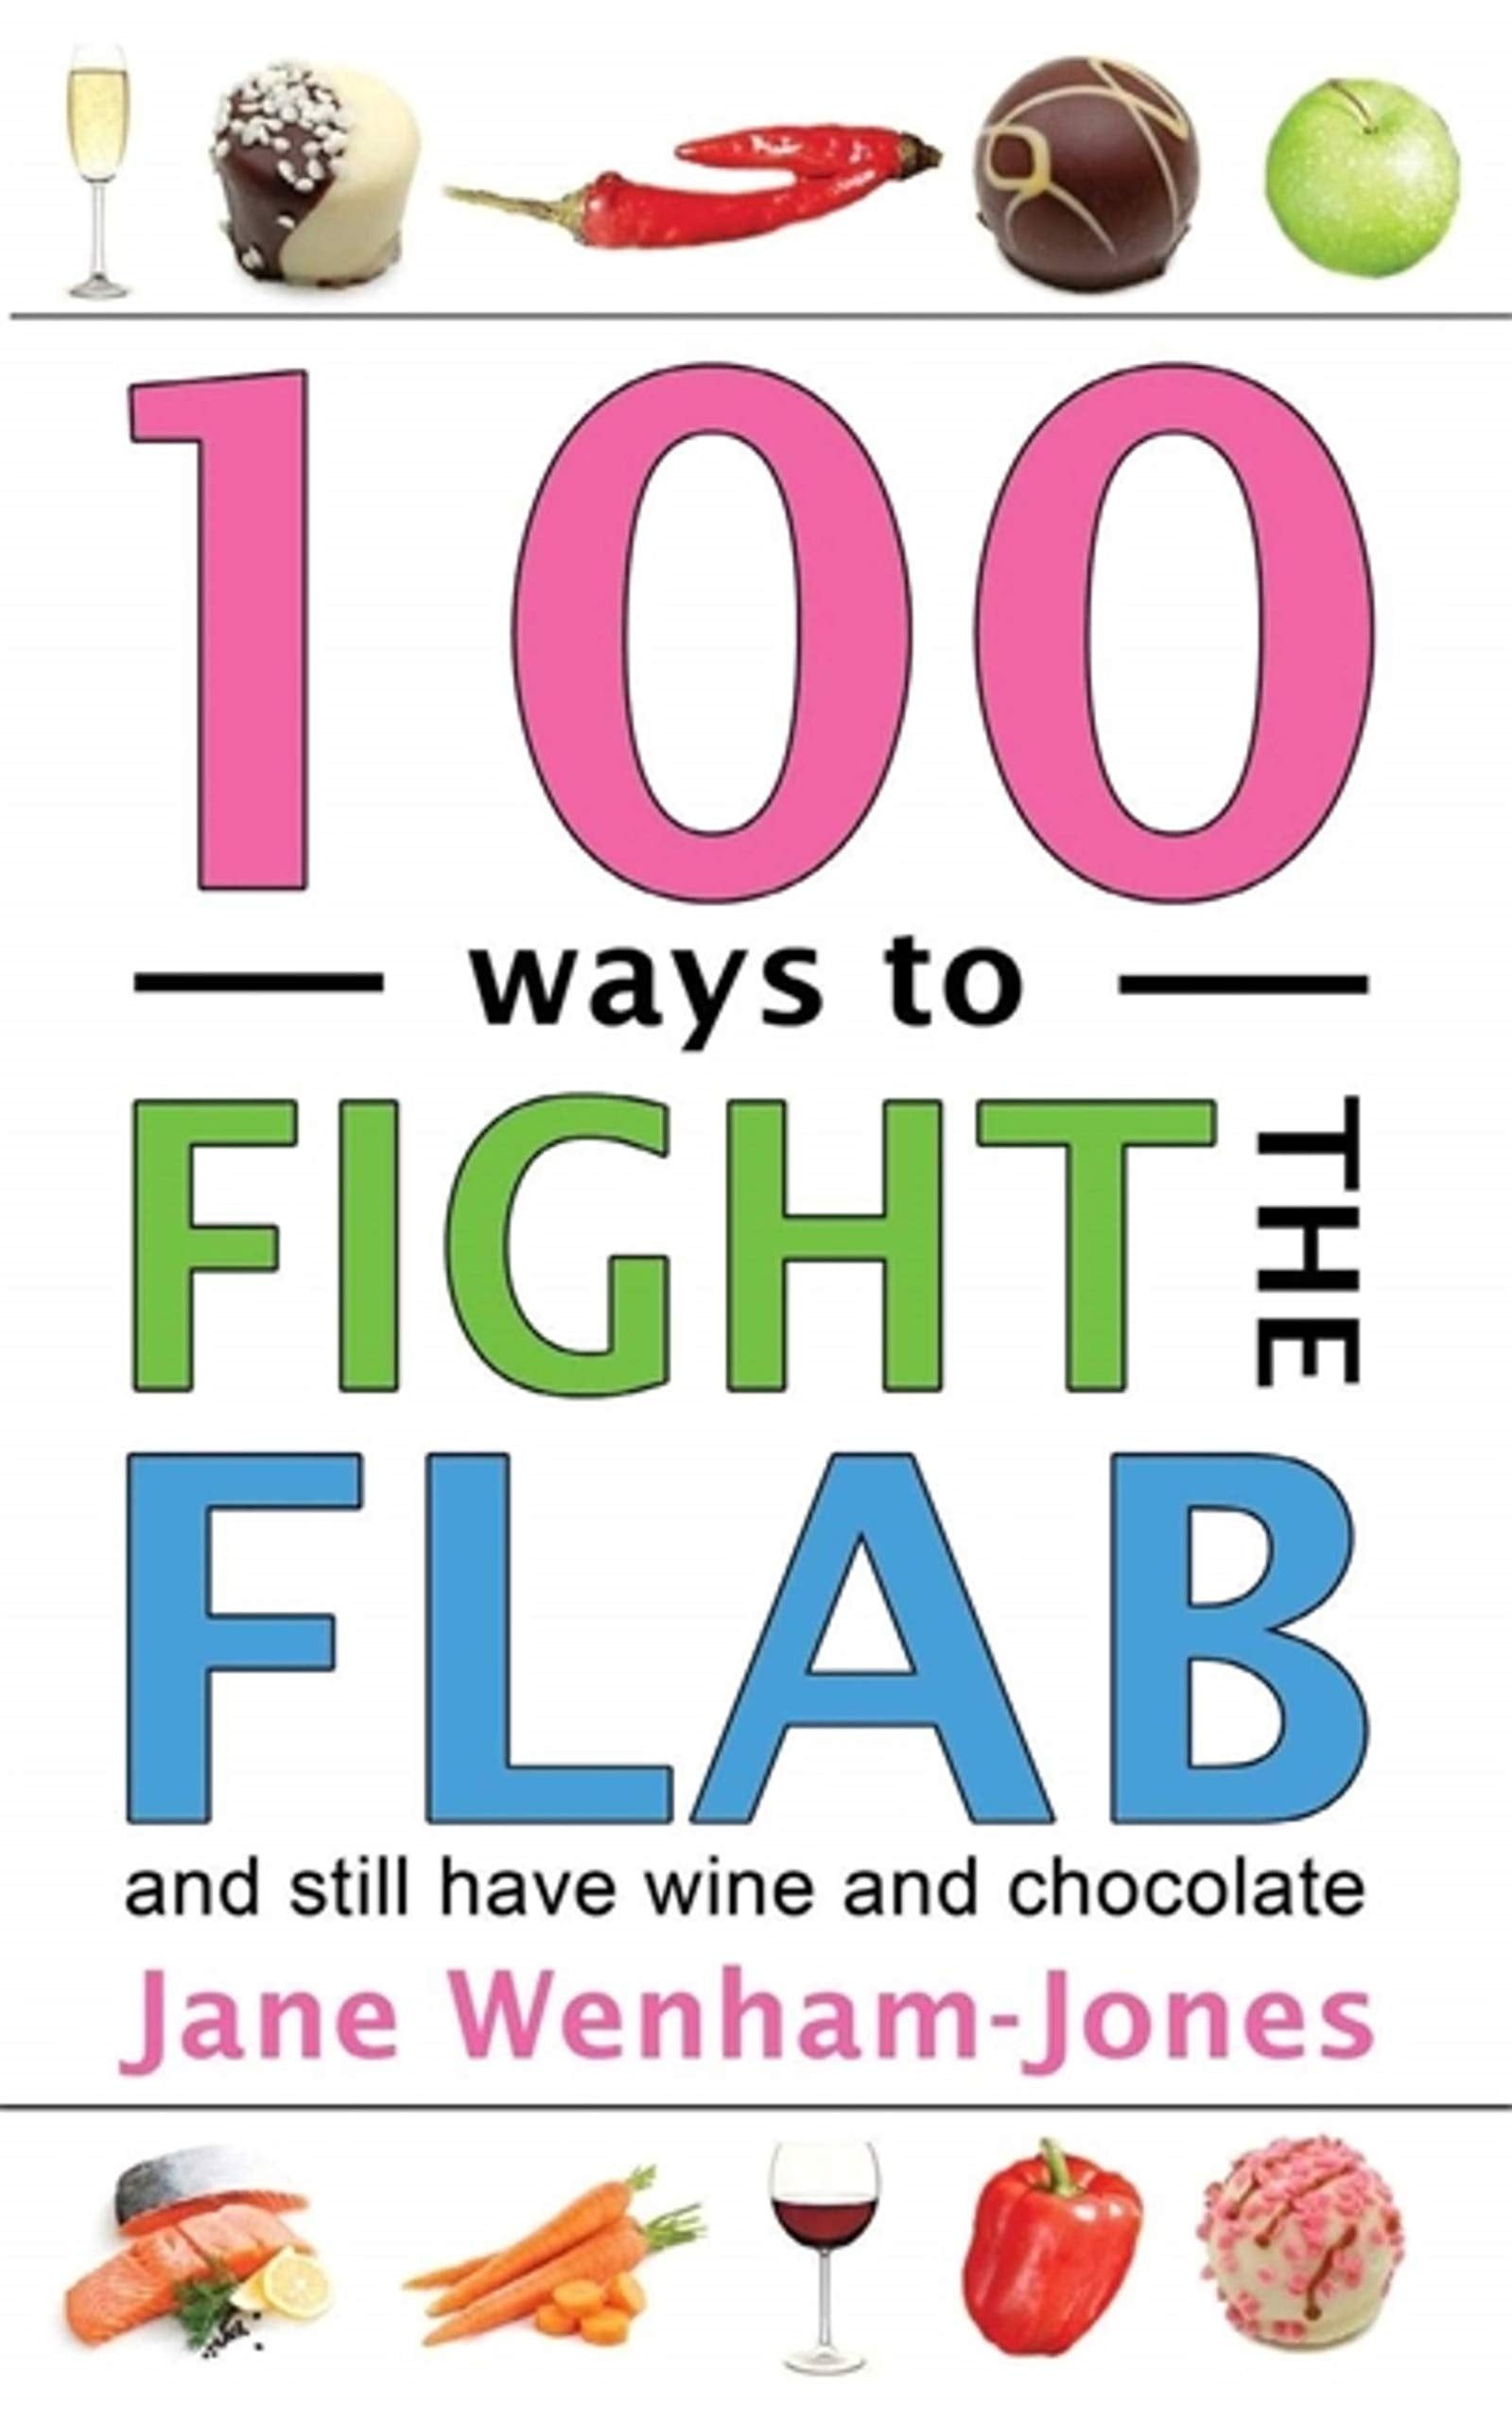 100 Ways to Fight the Flab: The Have-It-All Diet - SureShot Books Publishing LLC